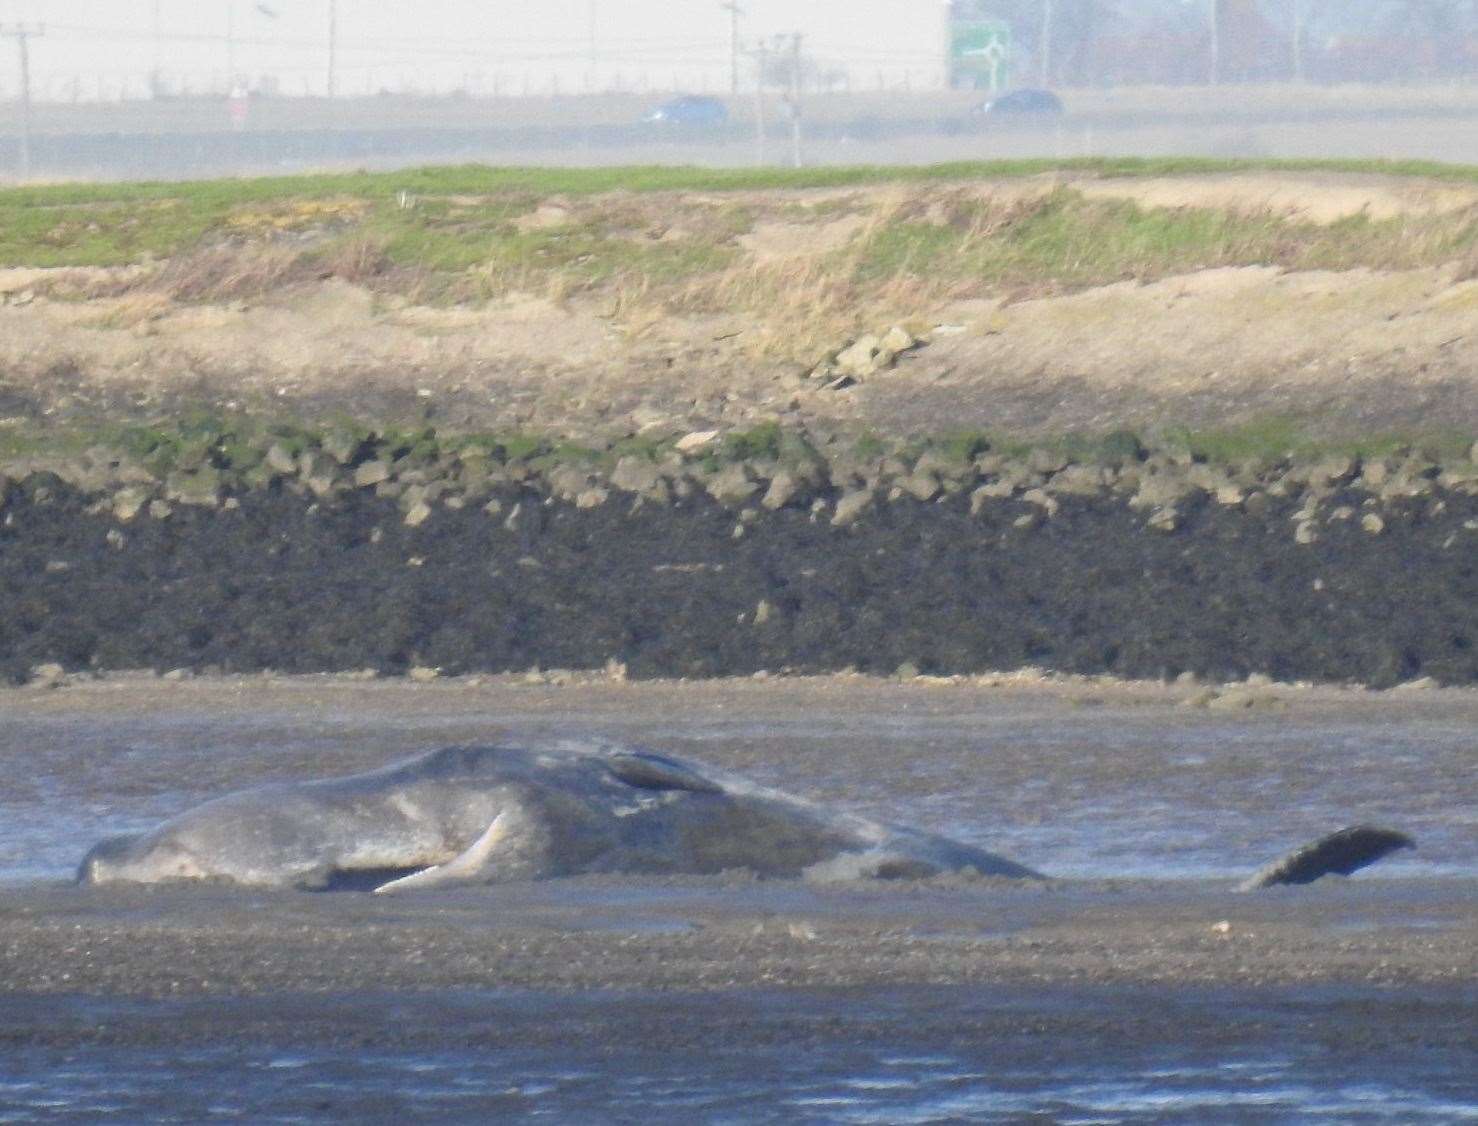 Dead whale on the Sheppey coast at Elmley. Picture: Lorraine St John, Kent Wildlife Rescue Services